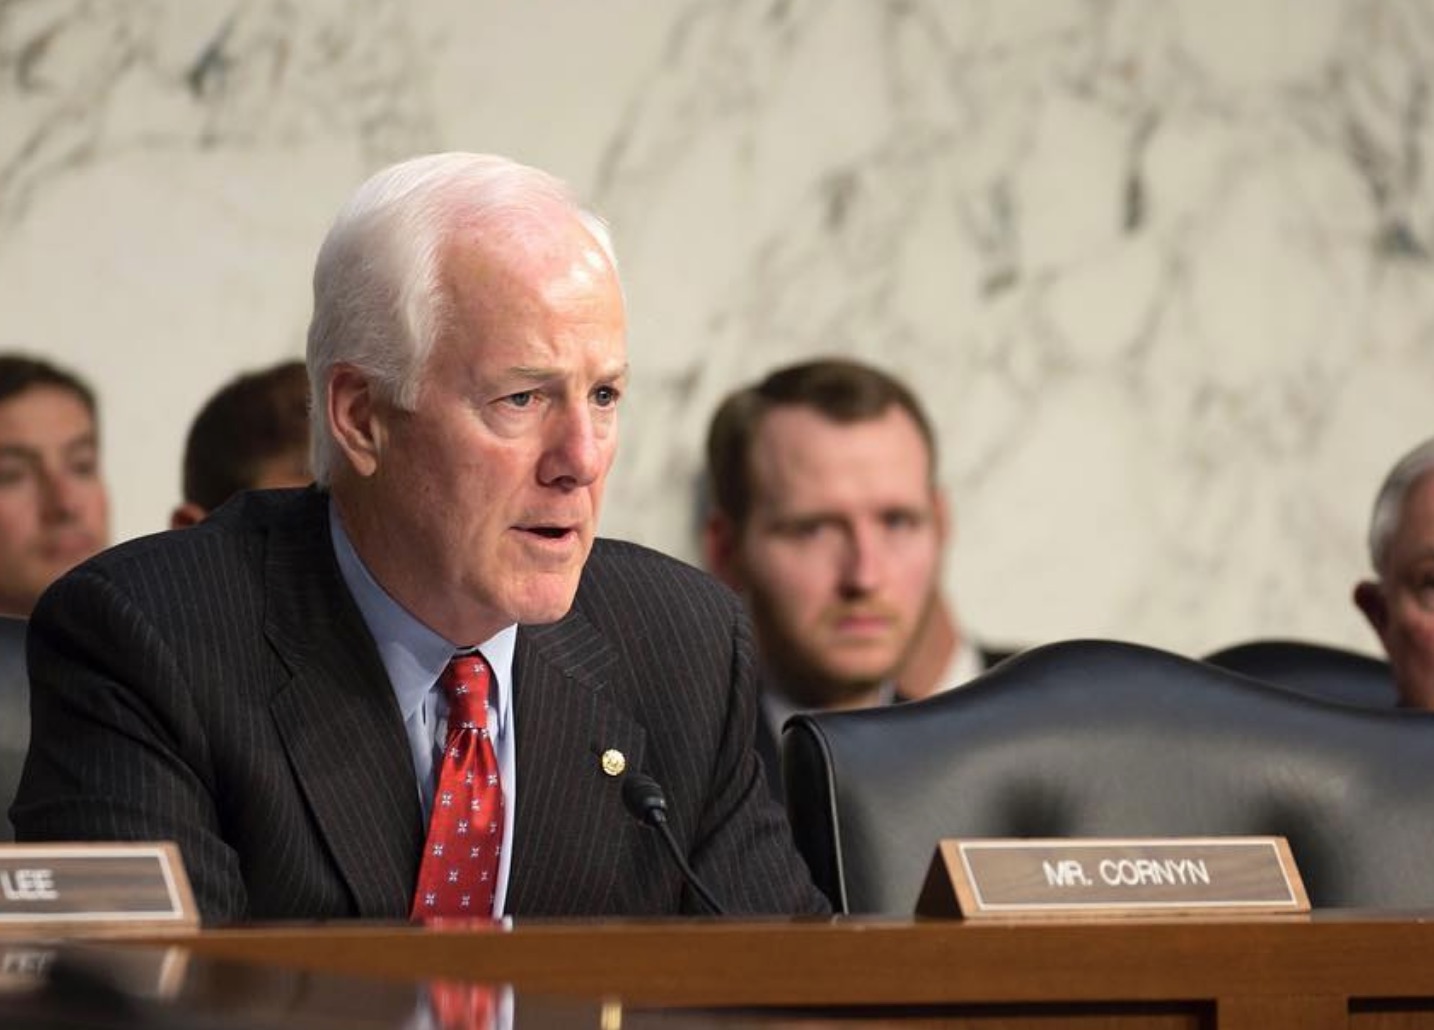 Cornyn Blasts Kerry’s Solar Panel Suggestion as an “Insult” to Texas Energy Workers